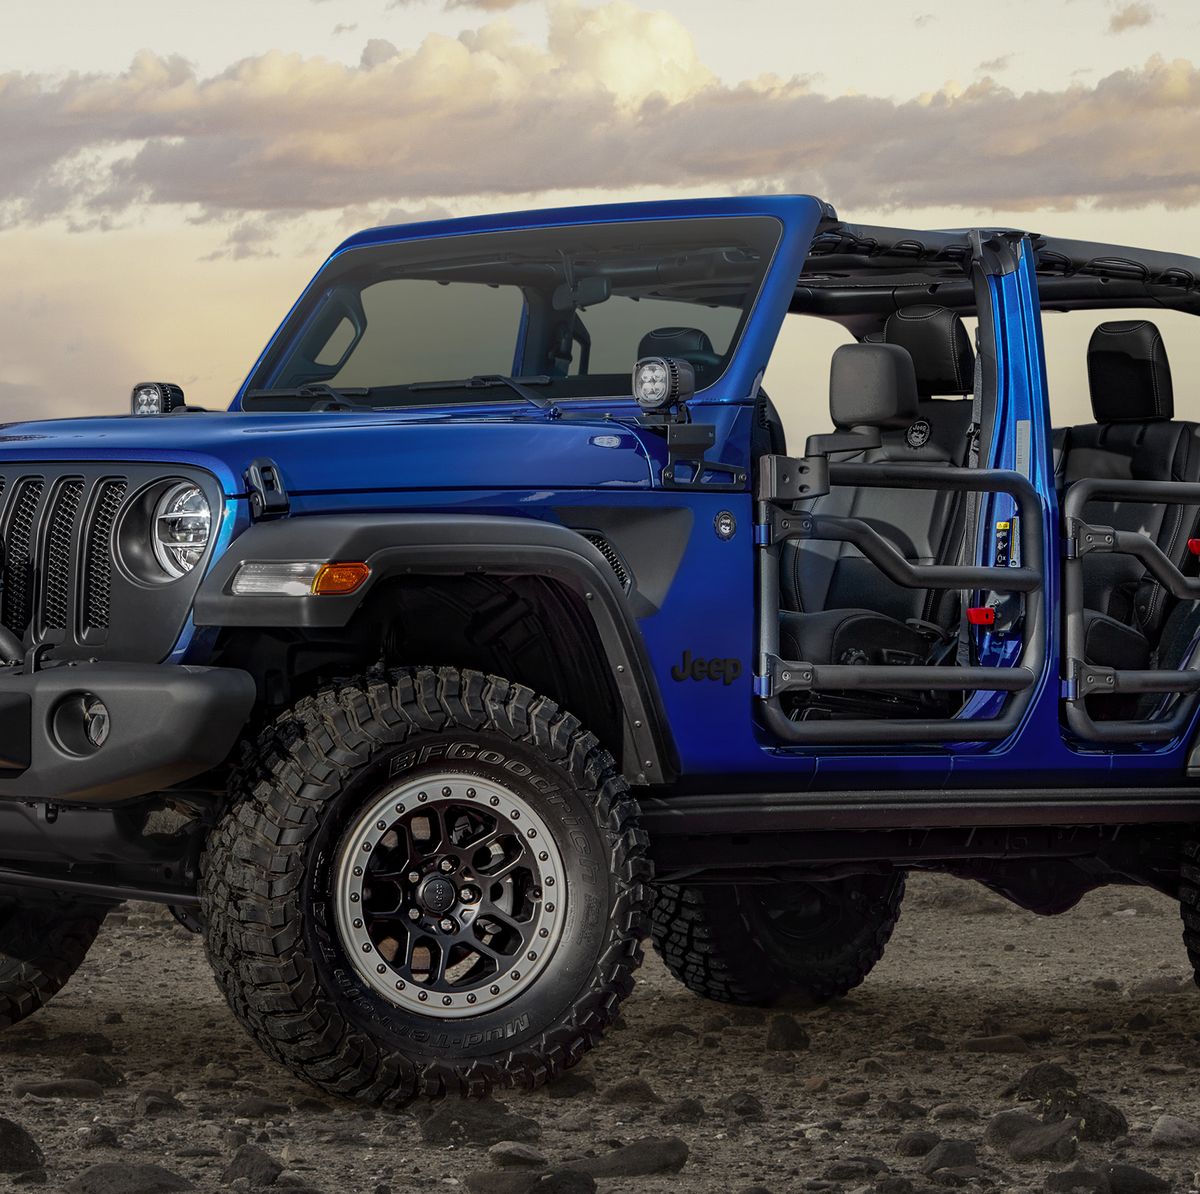 Mopar Will Sell you a Custom Jeep Wrangler, From the Dealer